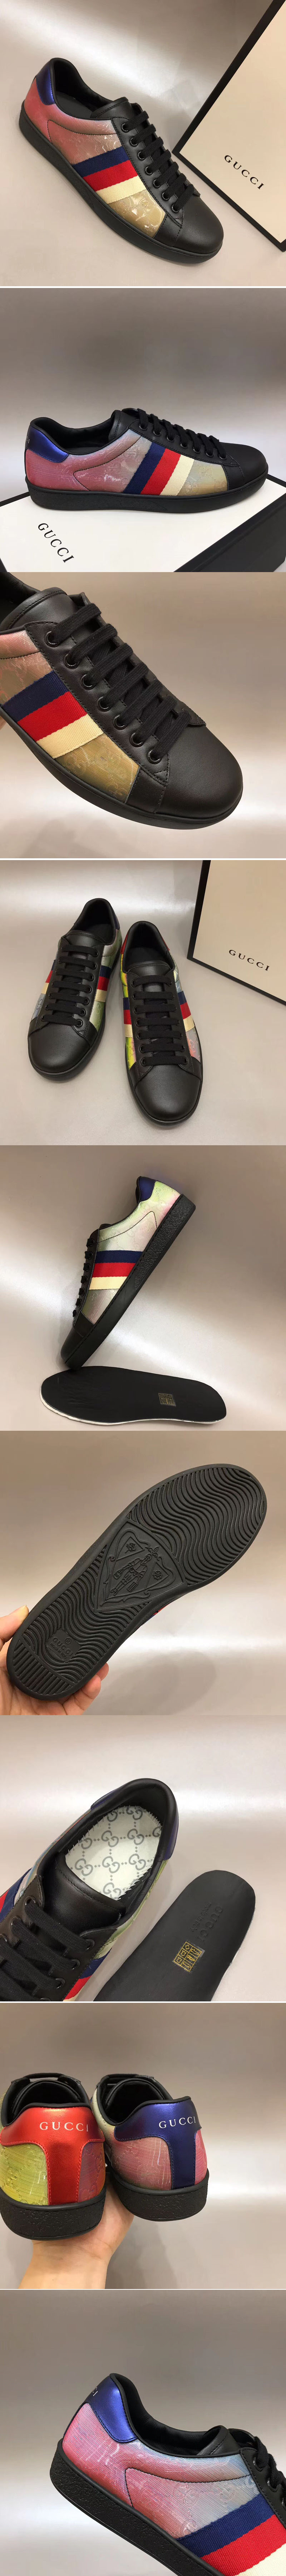 Replica Gucci Ace sneaker with Interlocking G Shoes Women and Mens Blue/Red/White Web Leather